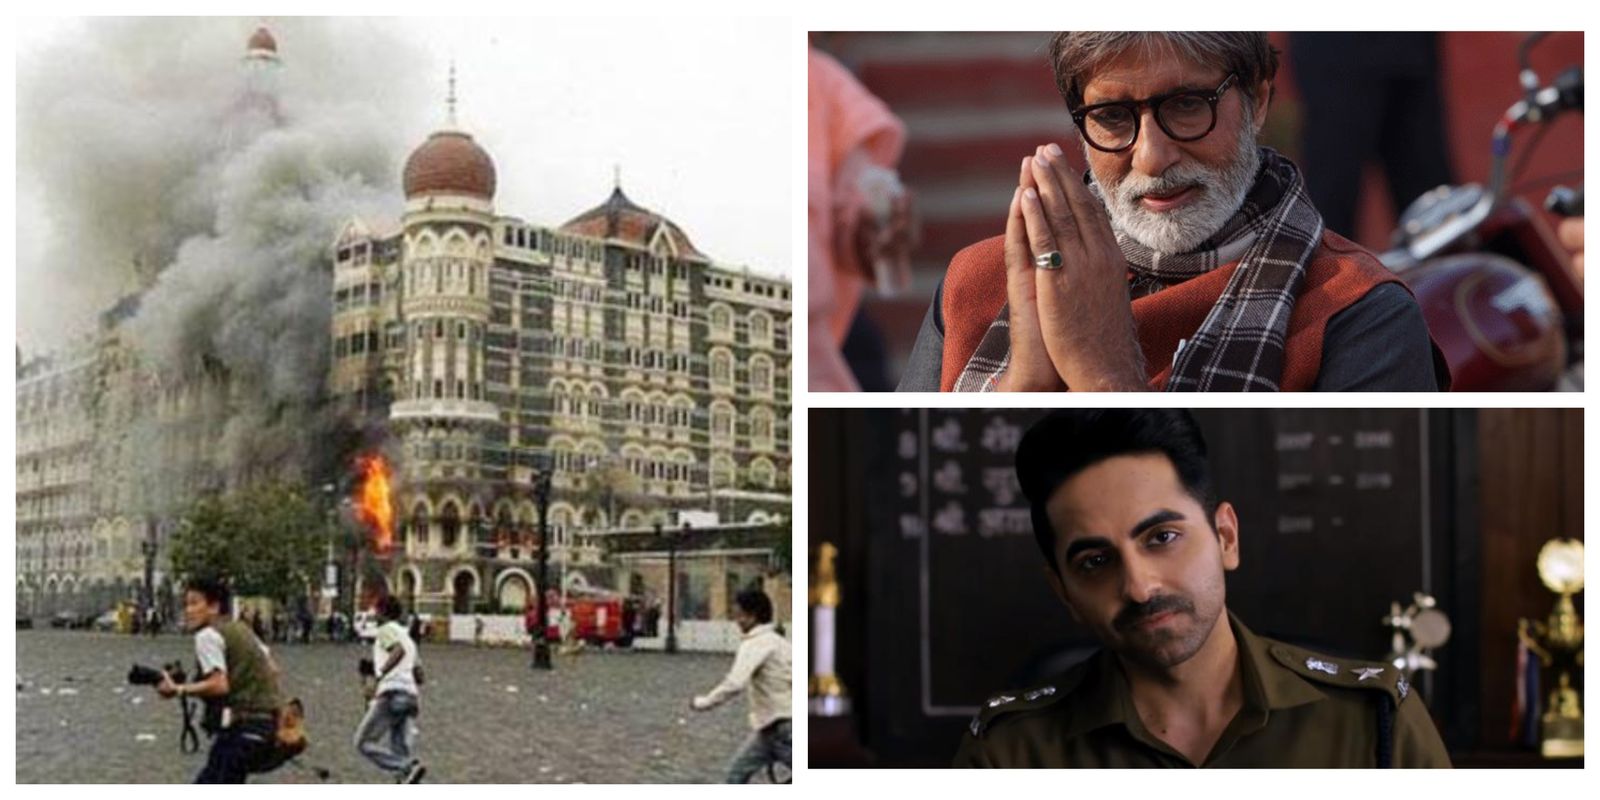 11 Years Of 26/11 Terror Attacks: Bollywood Celebs Remember The Heroes And The Horrors Of The Day